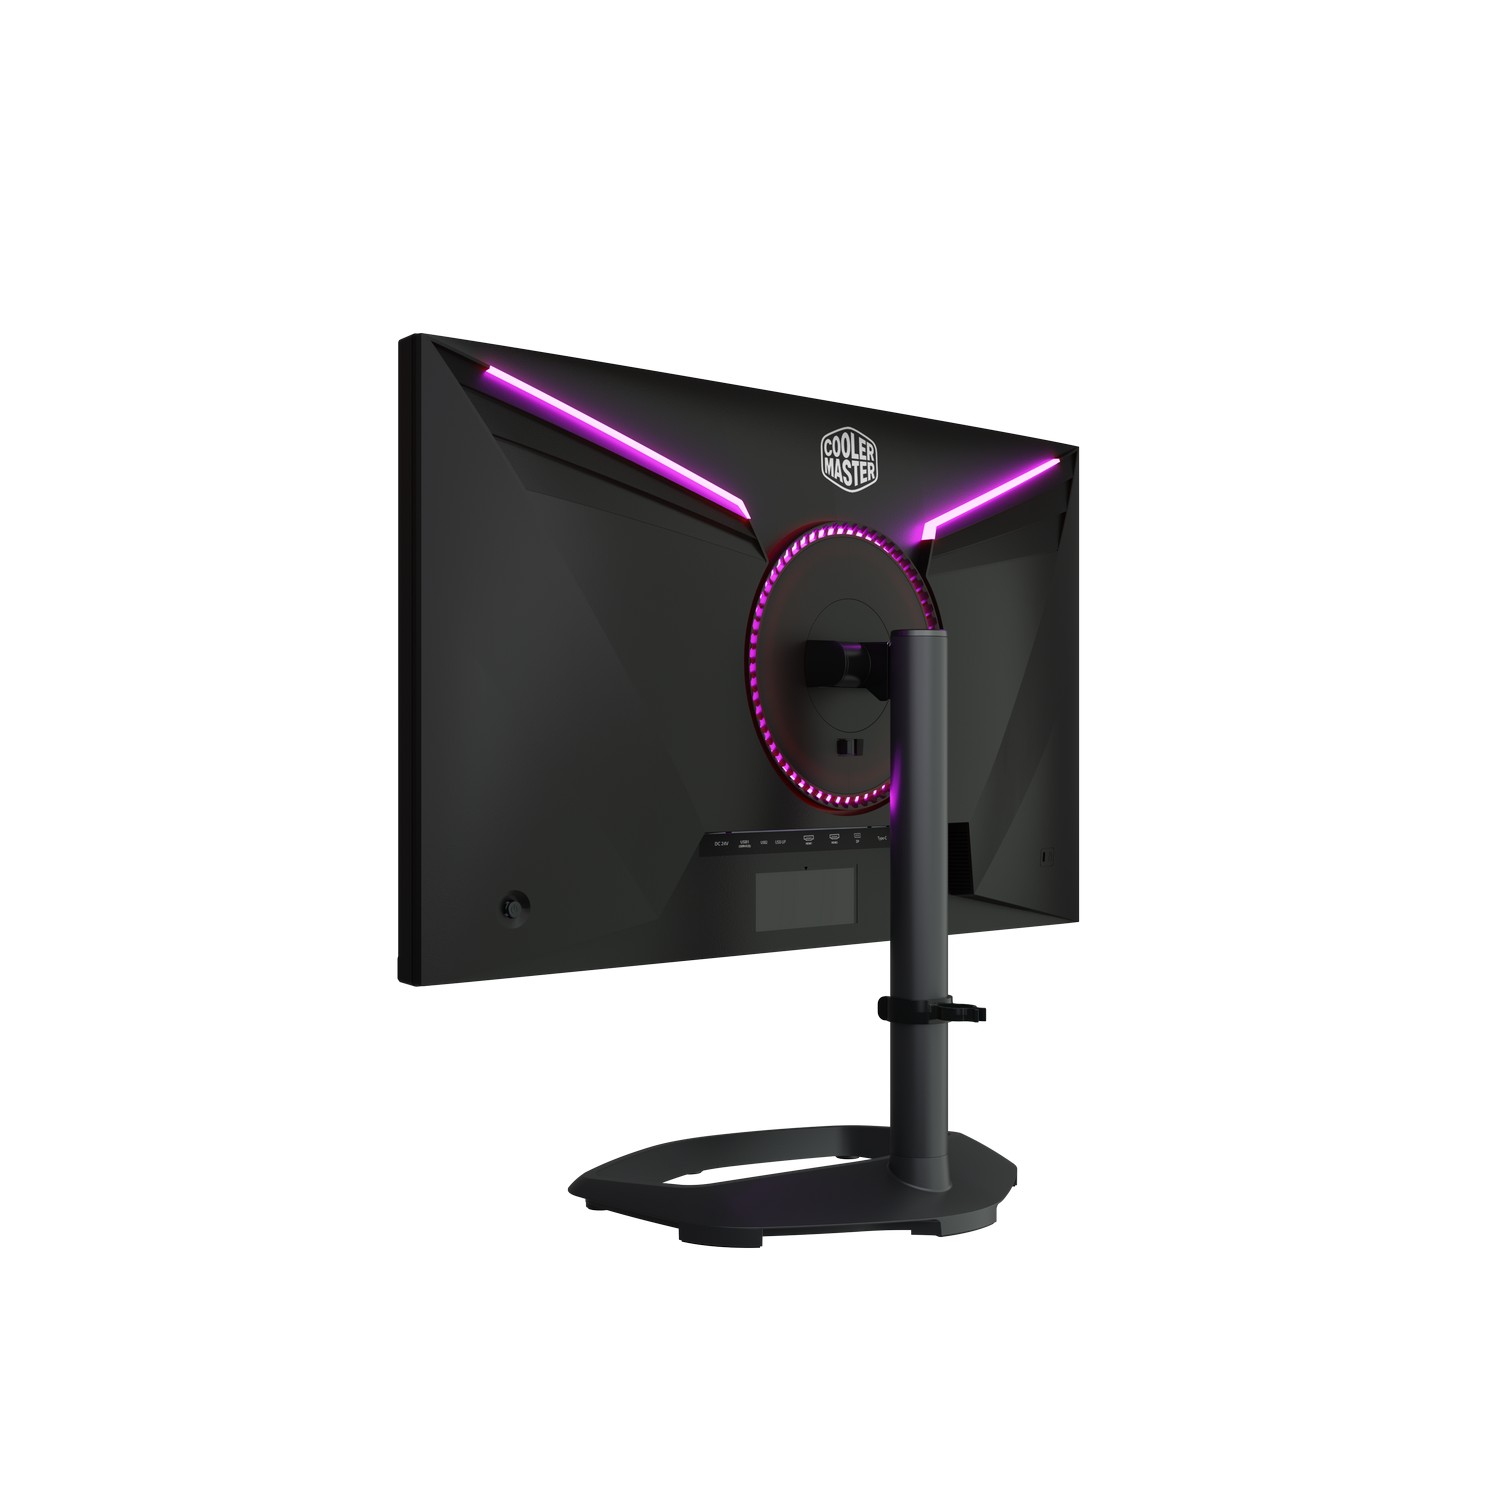 Cooler Master - Cooler Master Tempest GP27Q 27"  2560x1440 IPS 165Hz FreeSync Mini-LED HDR Widescreen Gaming Monitor